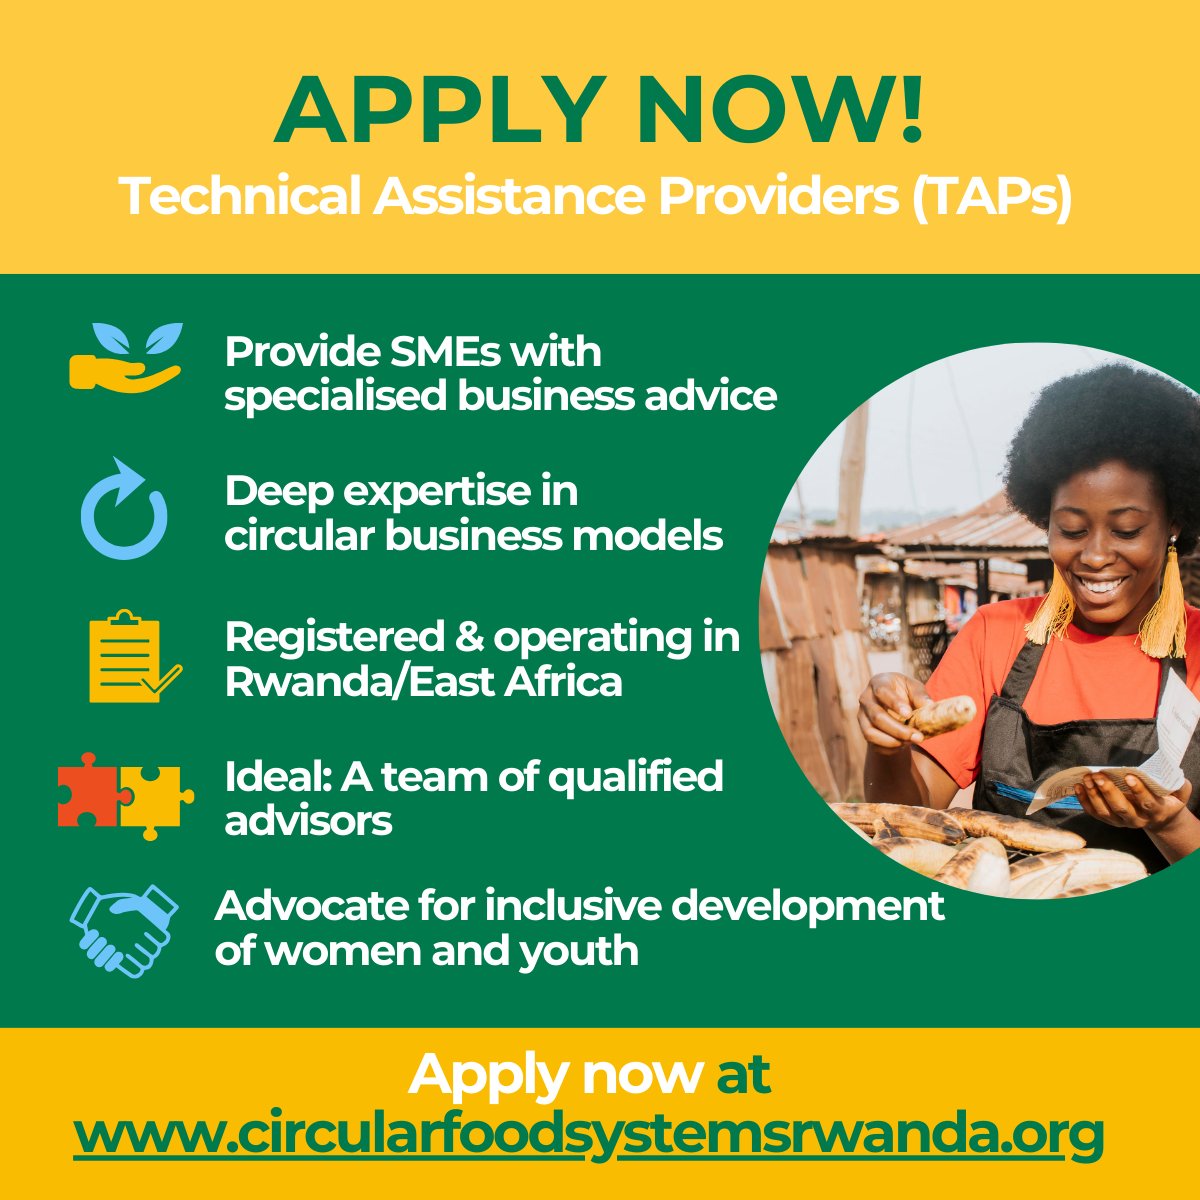 The Circular Food Systems for Rwanda program is looking for technical assistance providers! 🌾 If you have hands-on experience in circular business models, value chains, and waste streams in Rwanda/East Africa, apply now ➡️ bit.ly/49W684d #CircularFoodsRW